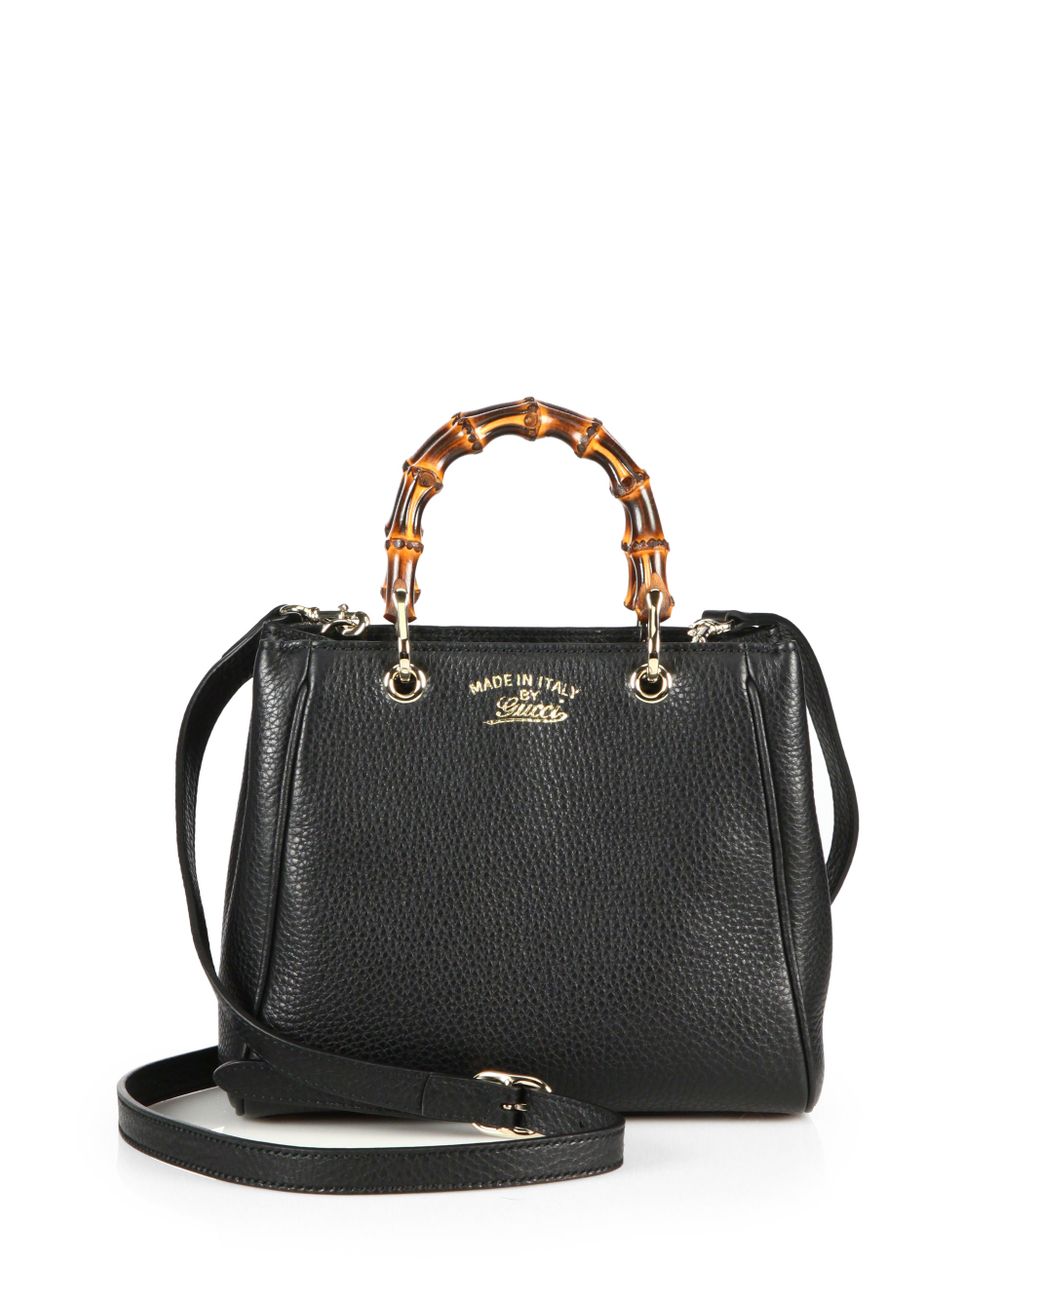 Gucci Bamboo Shopper Top Handle Bag in Black | Lyst